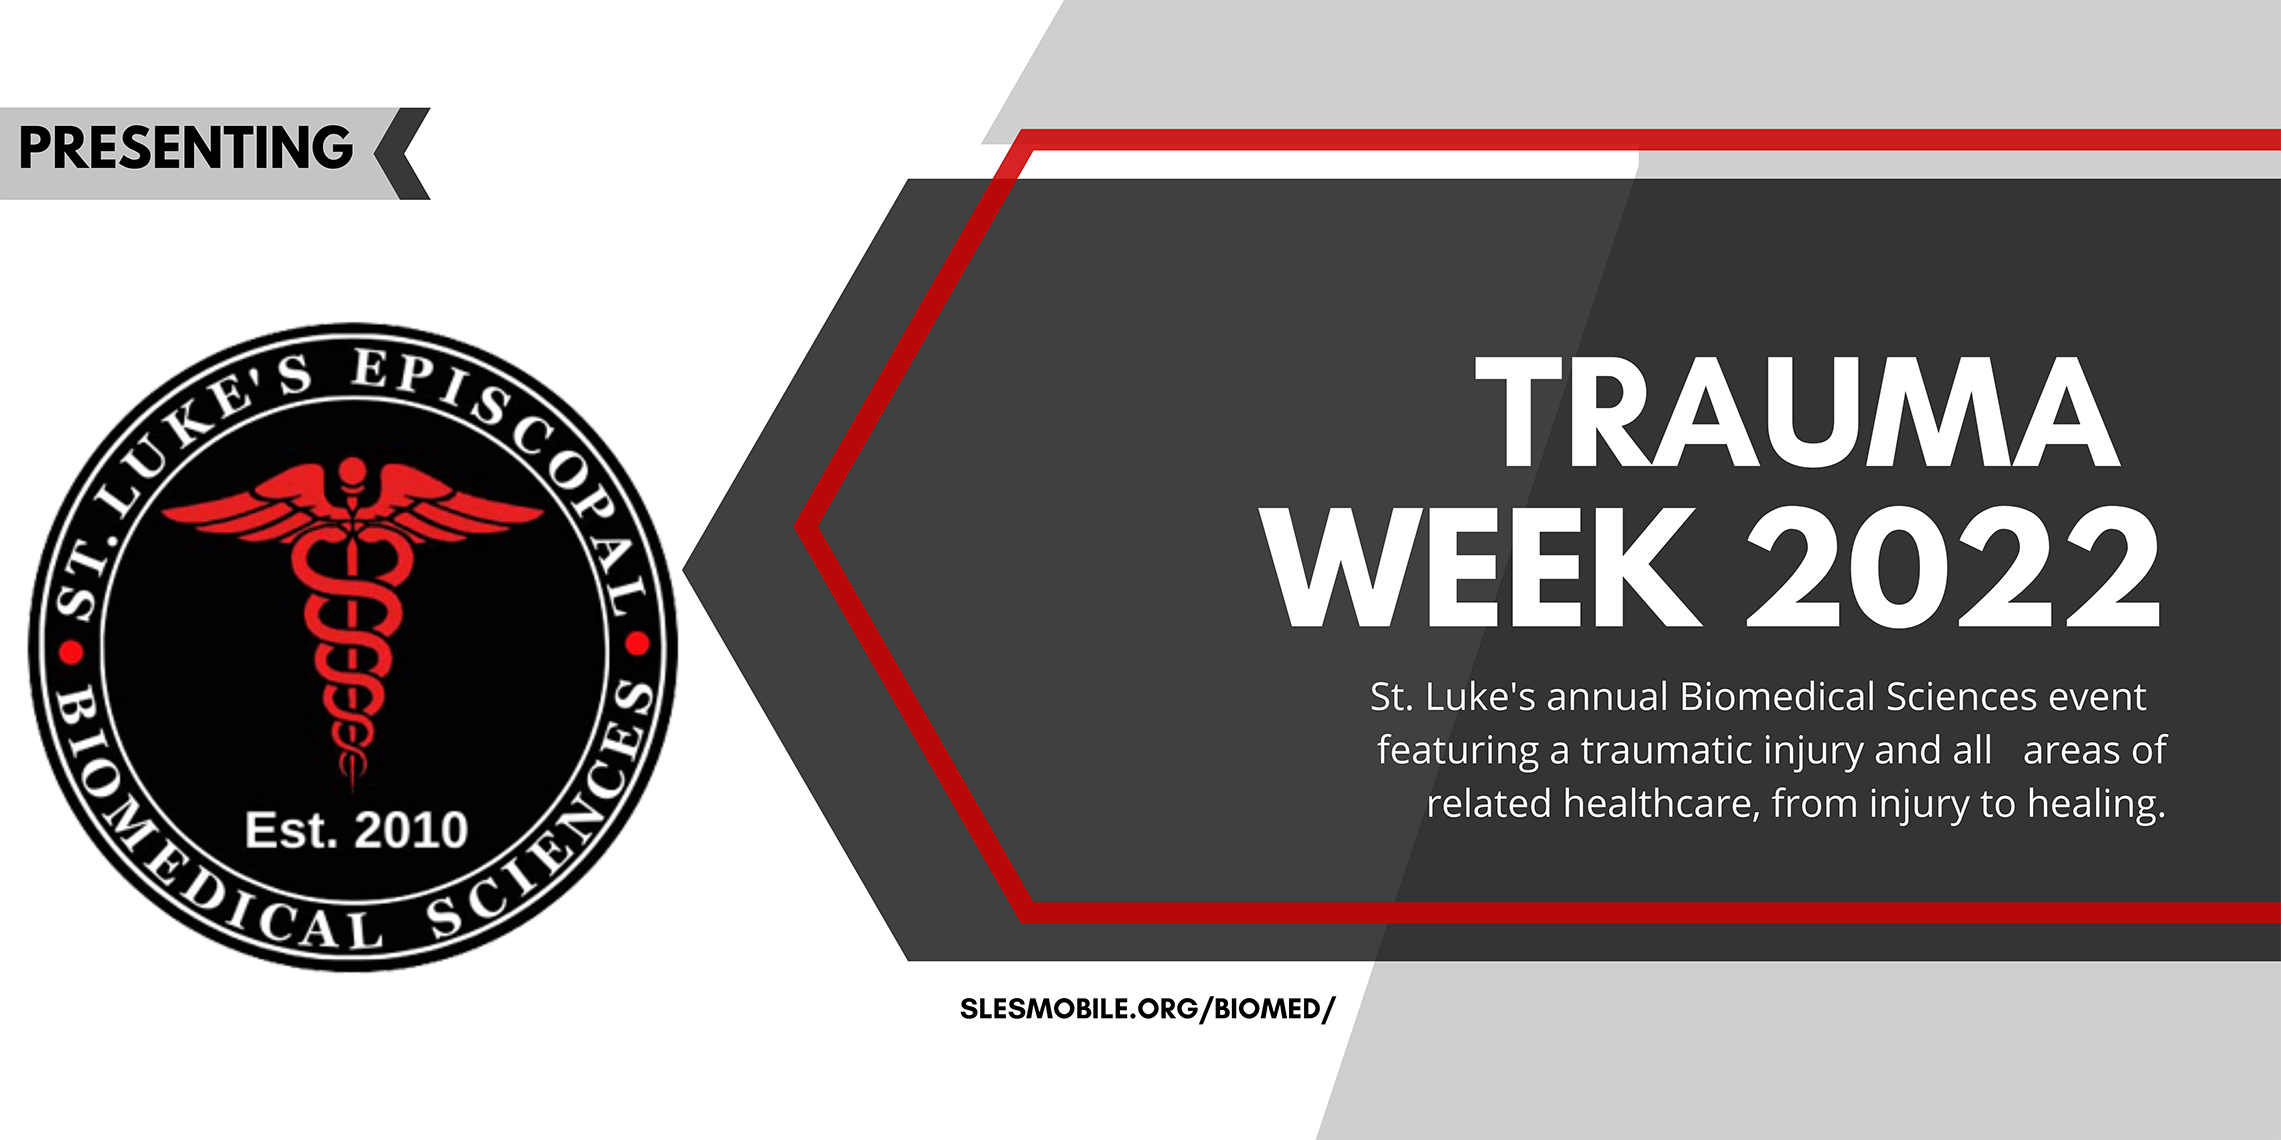 Featured image for “Trauma Week 2022”